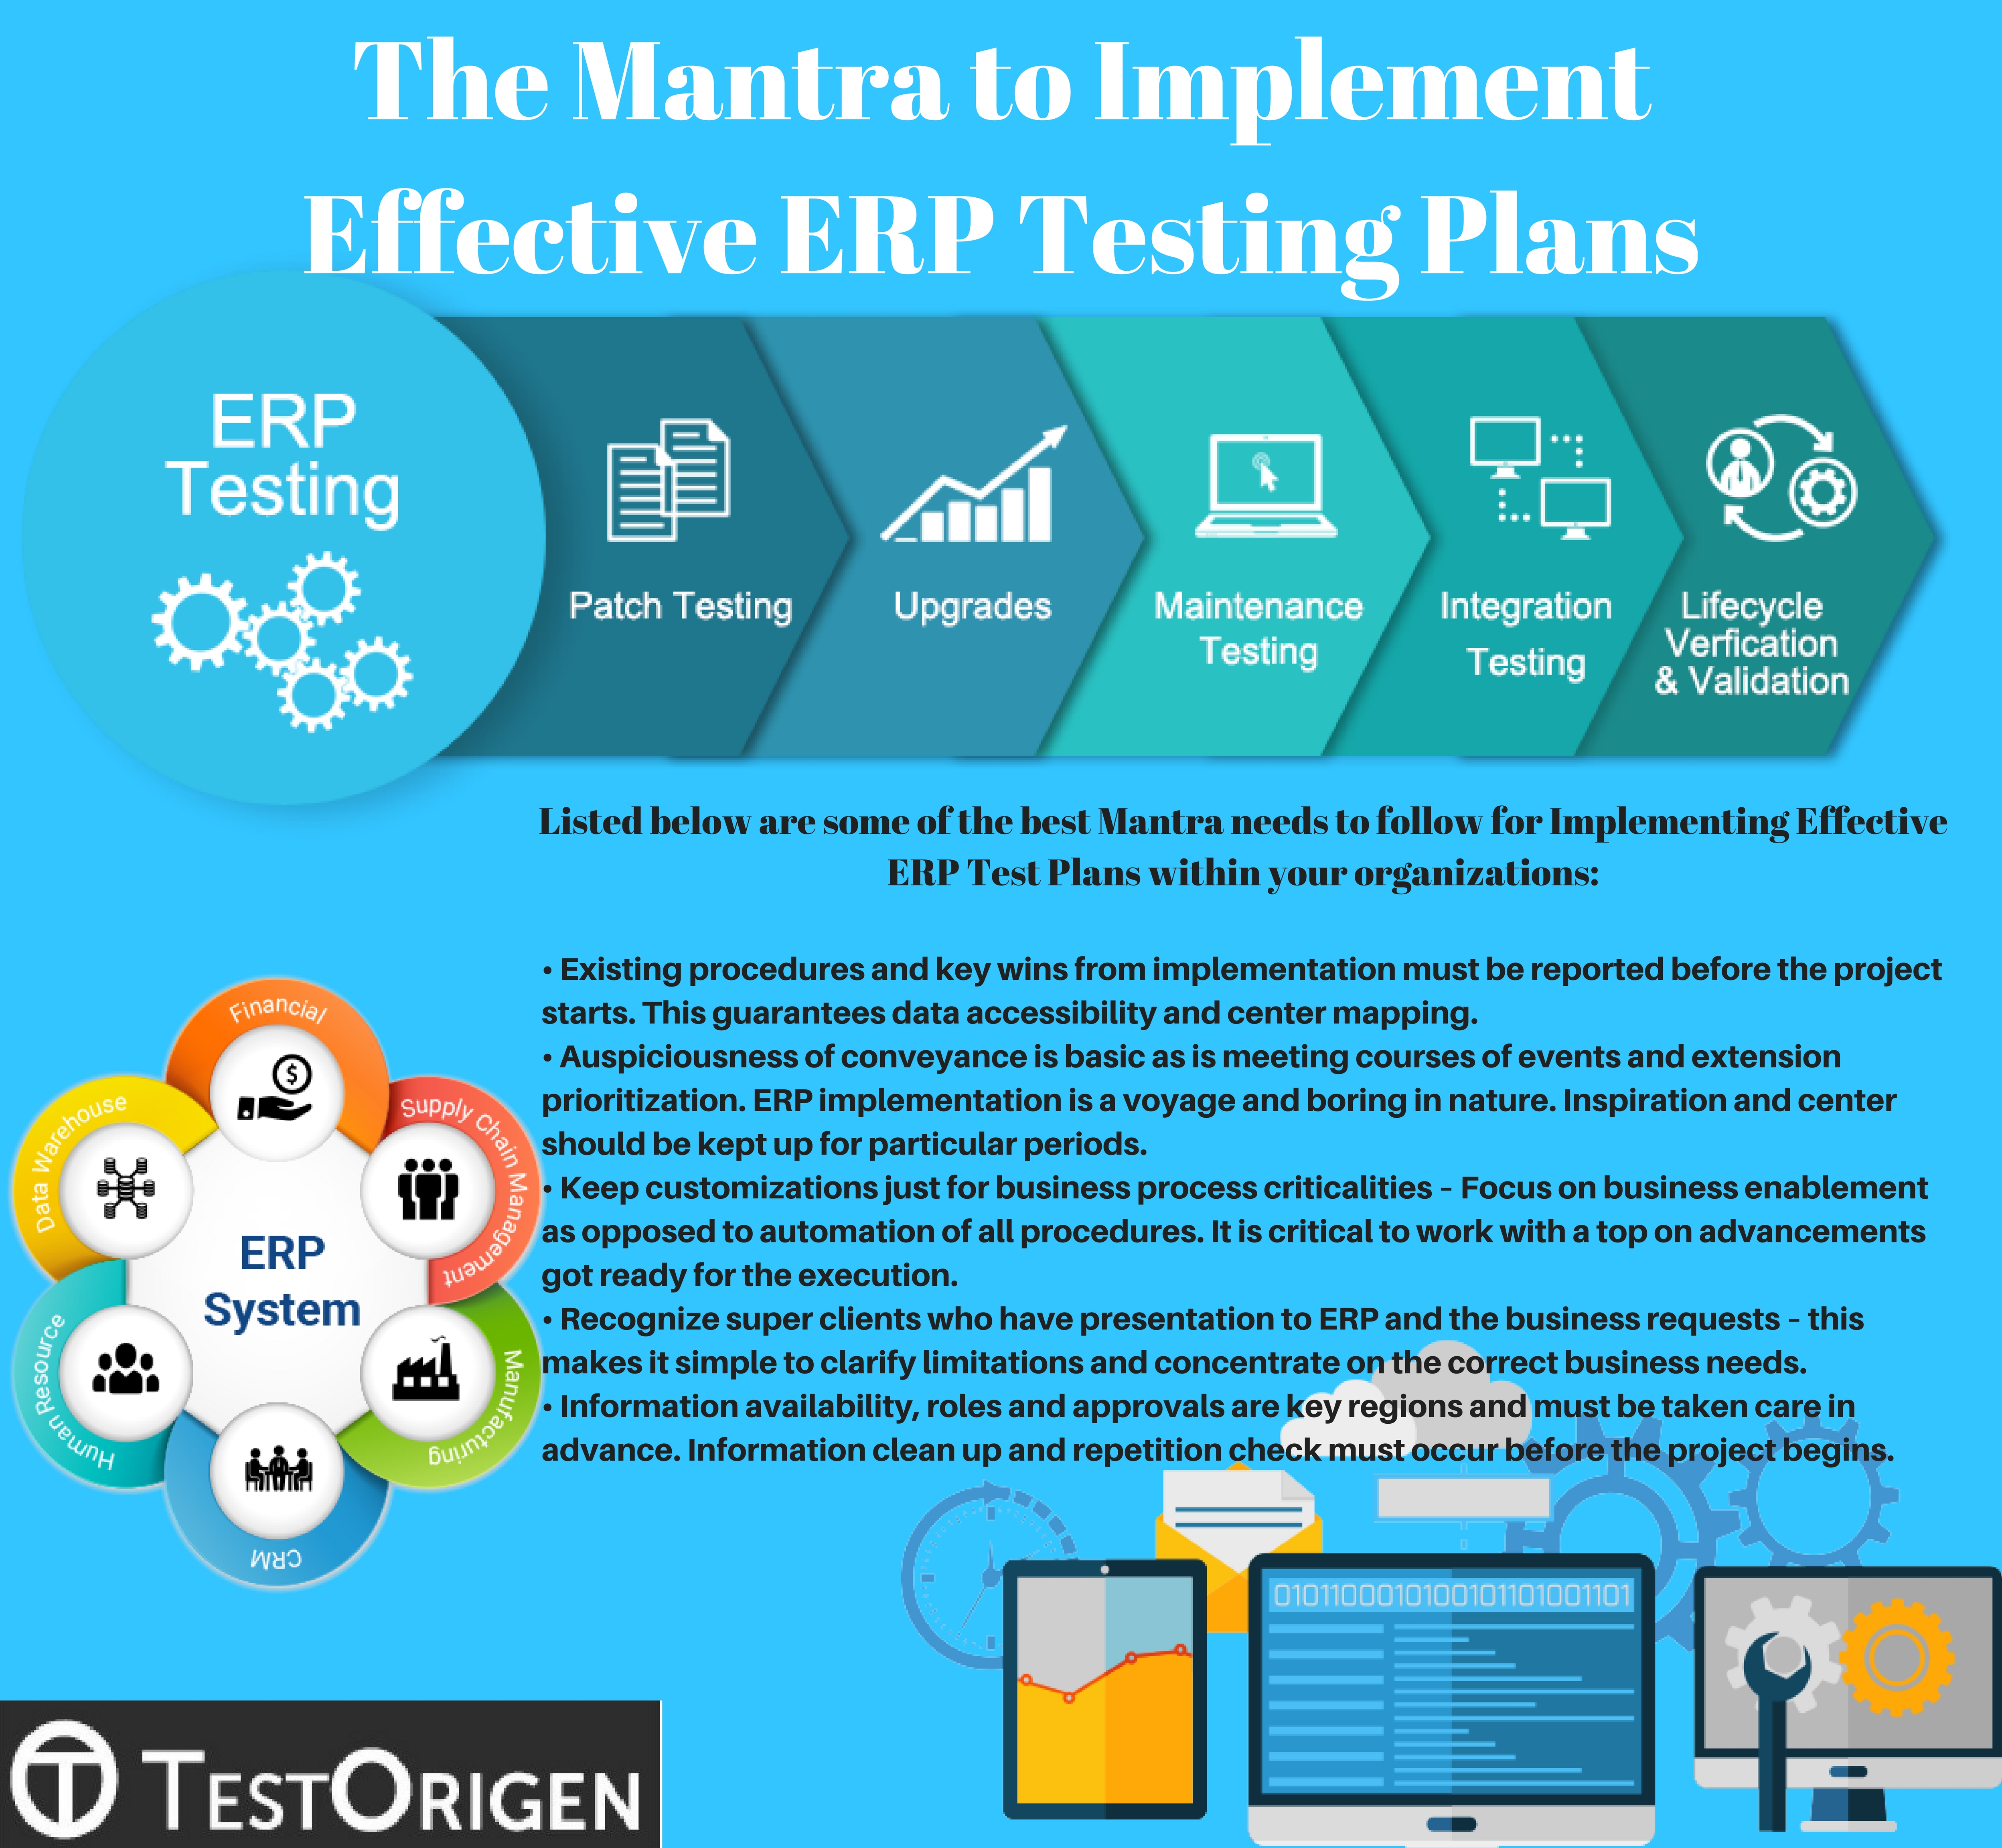 The Mantra to Implement Effective ERP Testing Plans. erp test plan 